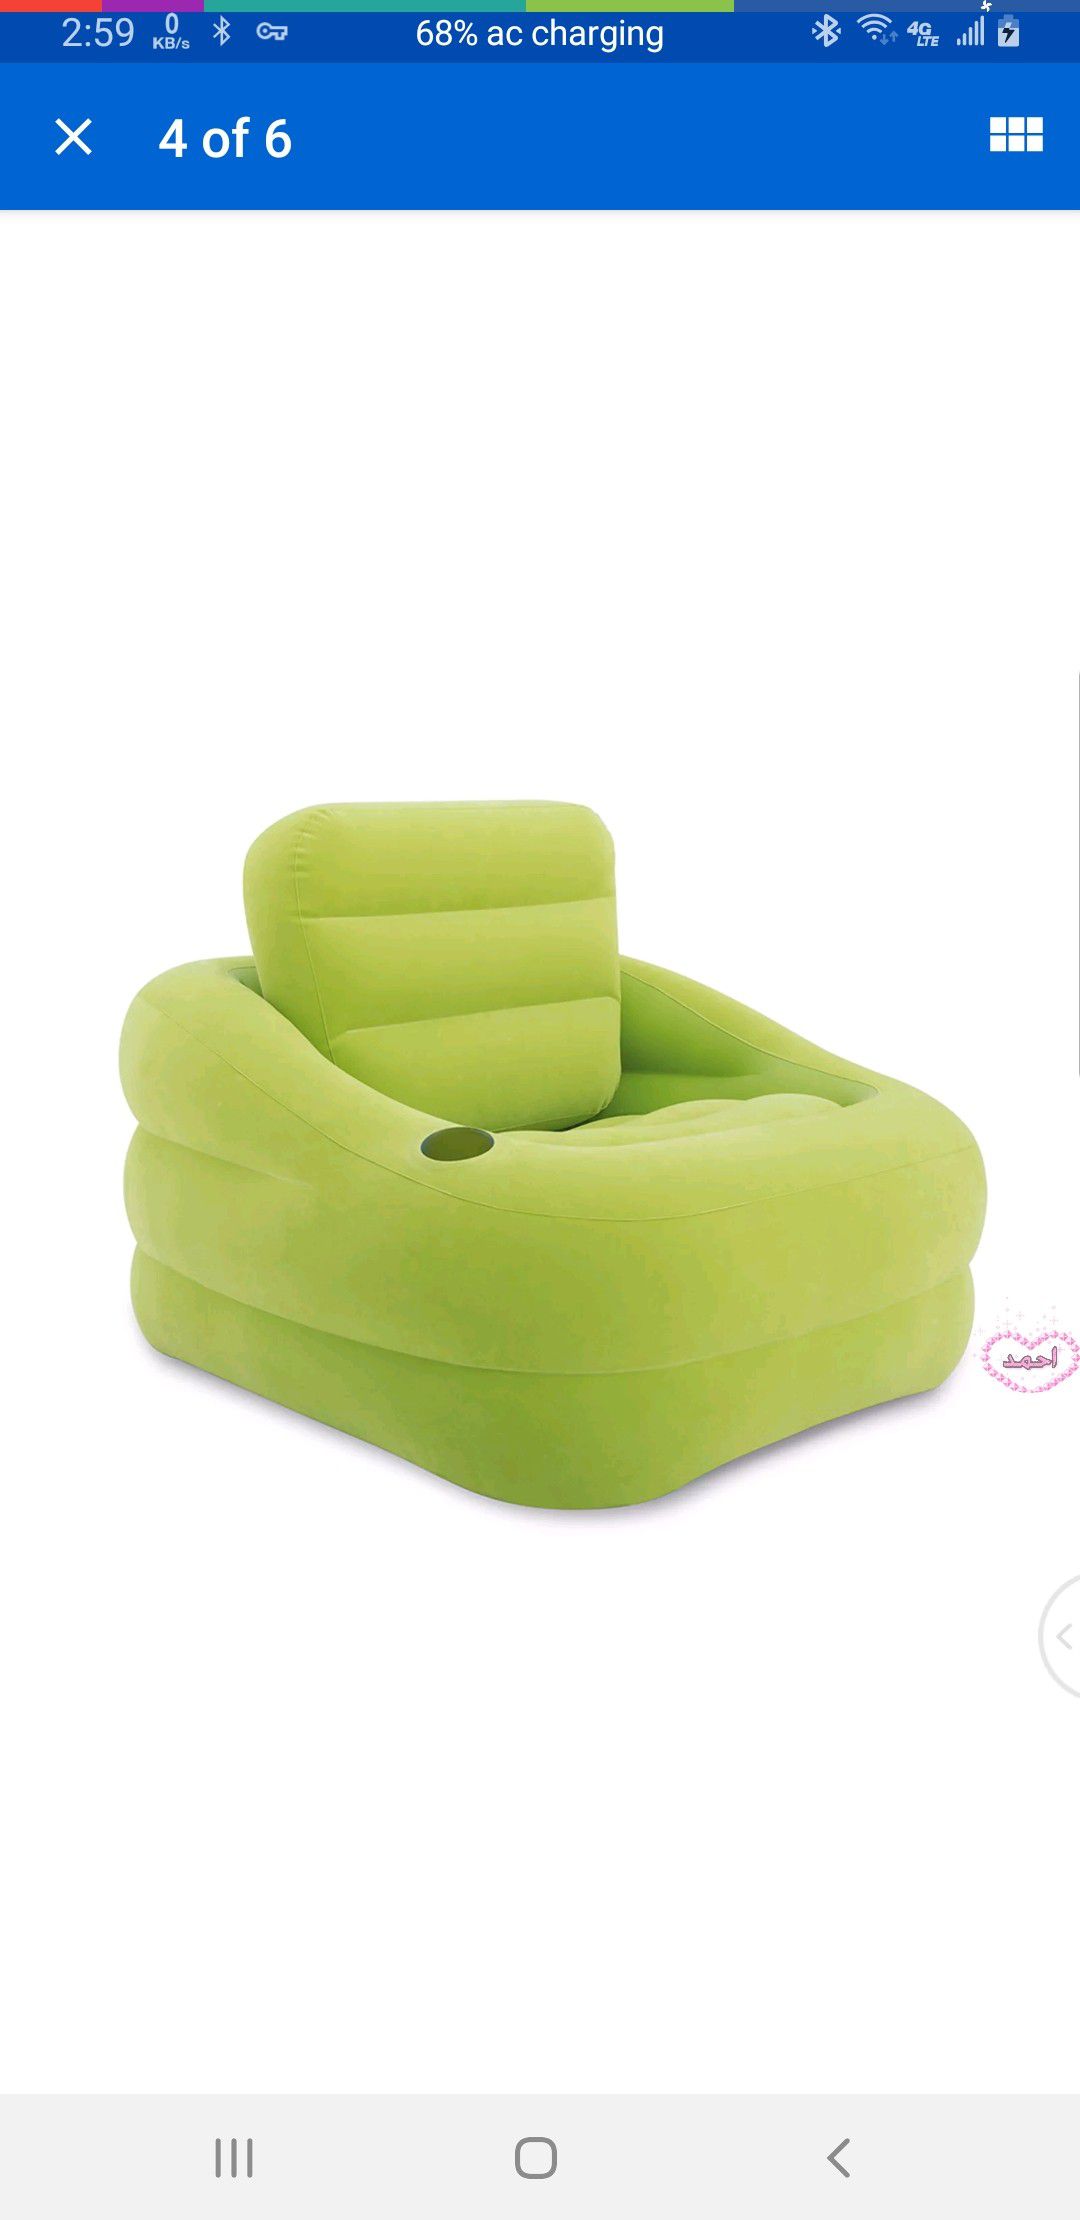 ntex Inflatable Indoor or Outdoor Accent Chair with Cup Holder, Green